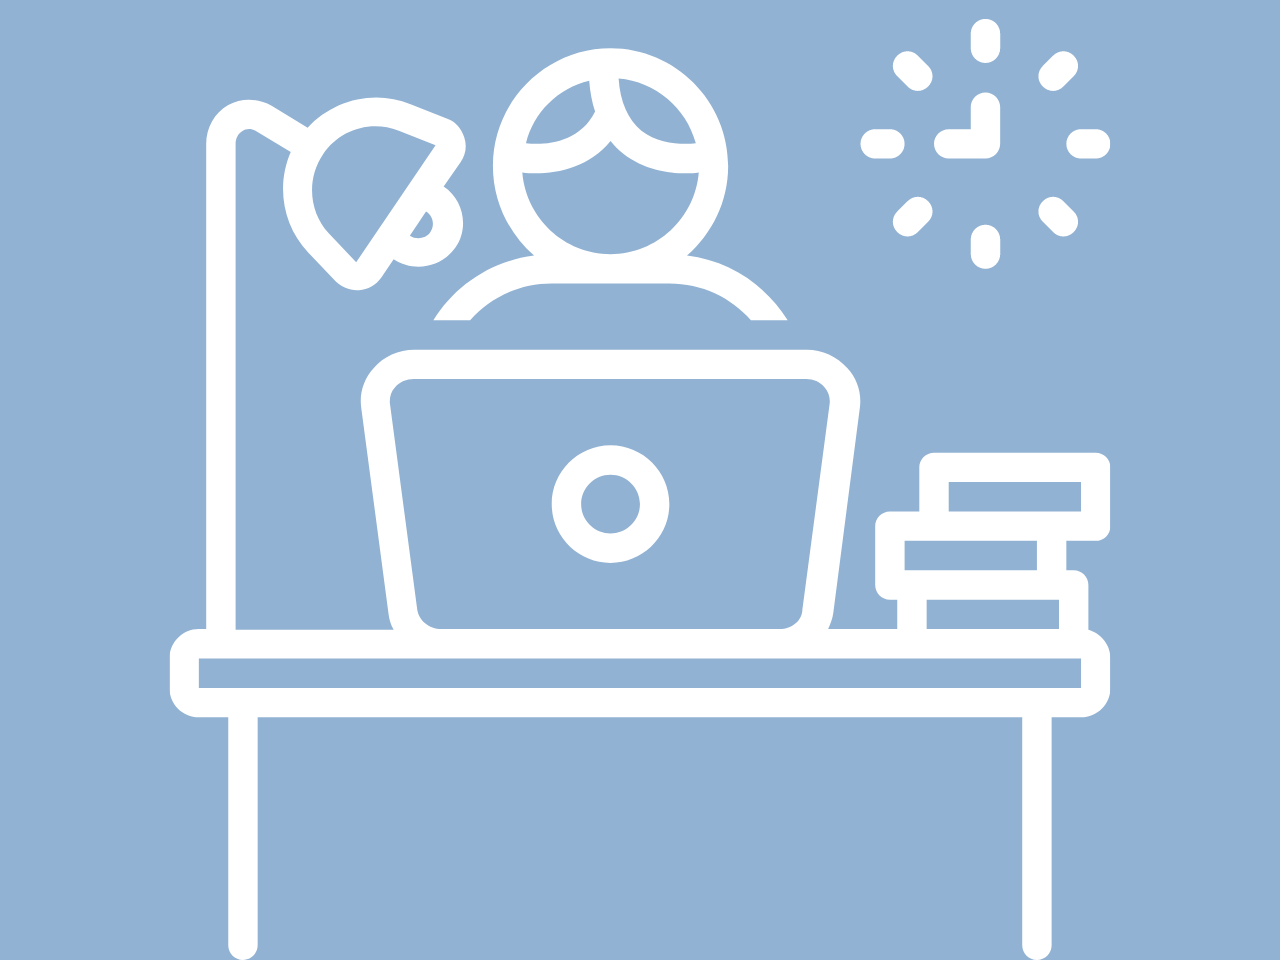 White symbol on a light blue background with a symbol of a person working at a computer at a desk with a lamp and stack of books and a clock on the wall.